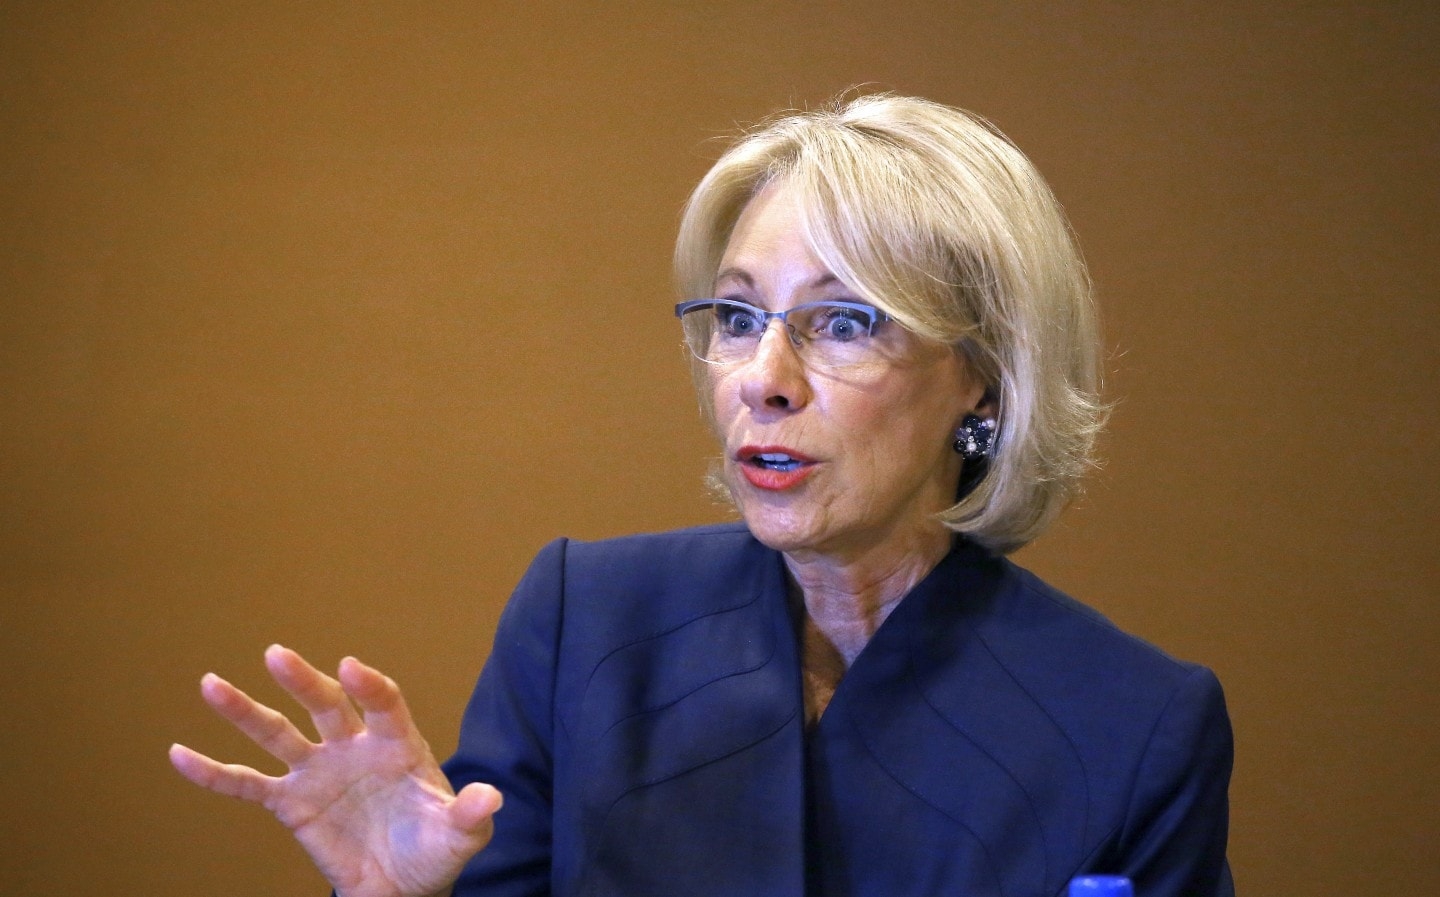 Betsy DeVos compares choice of abortion to choice of slavery